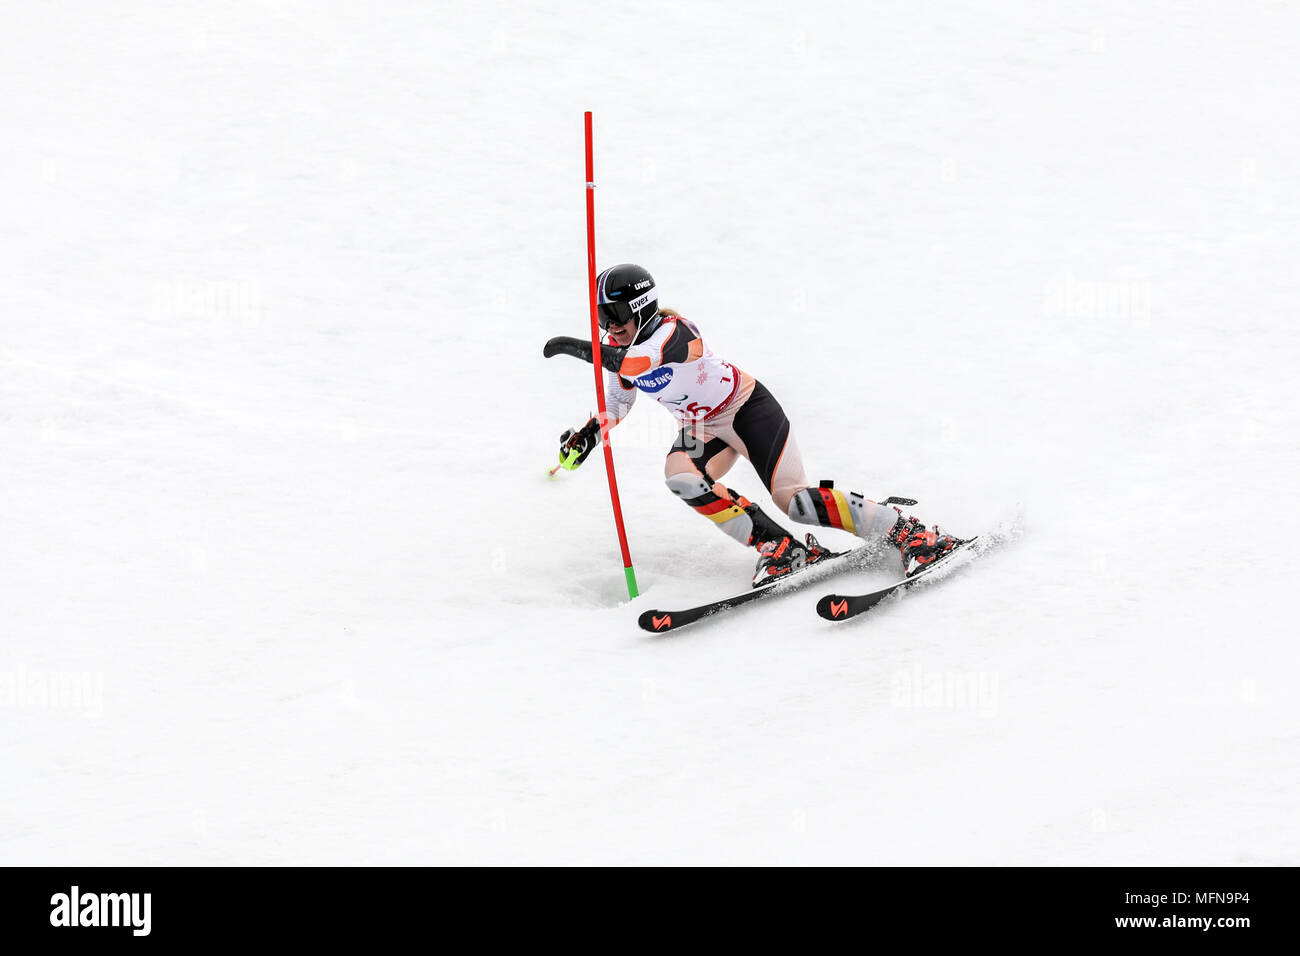 PyeongChang 2018 March 18th . Women's Slalom. Winter paralympic games. Stock Photo